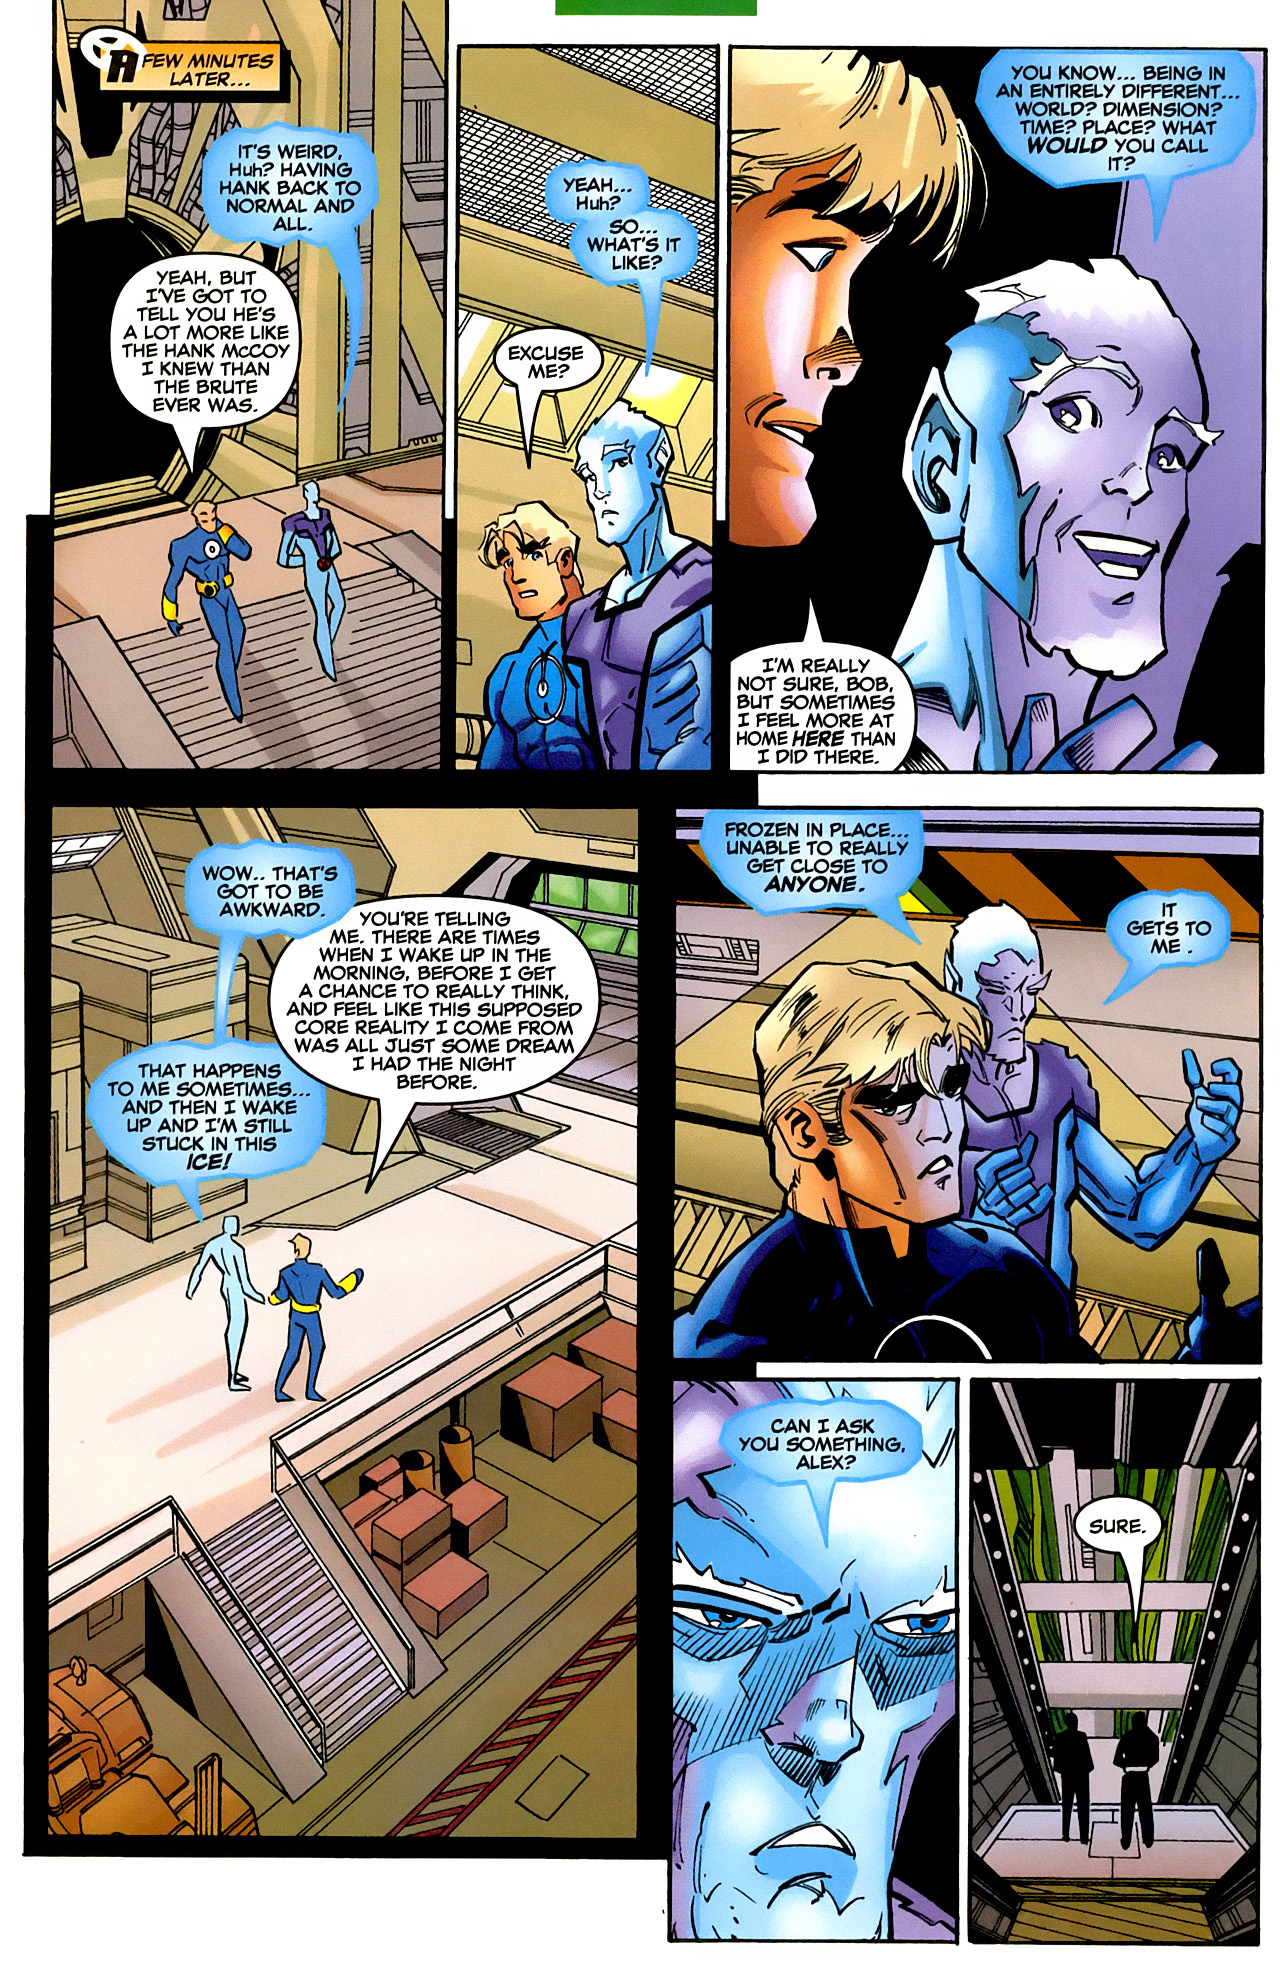 Read online Mutant X comic -  Issue #24 - 11